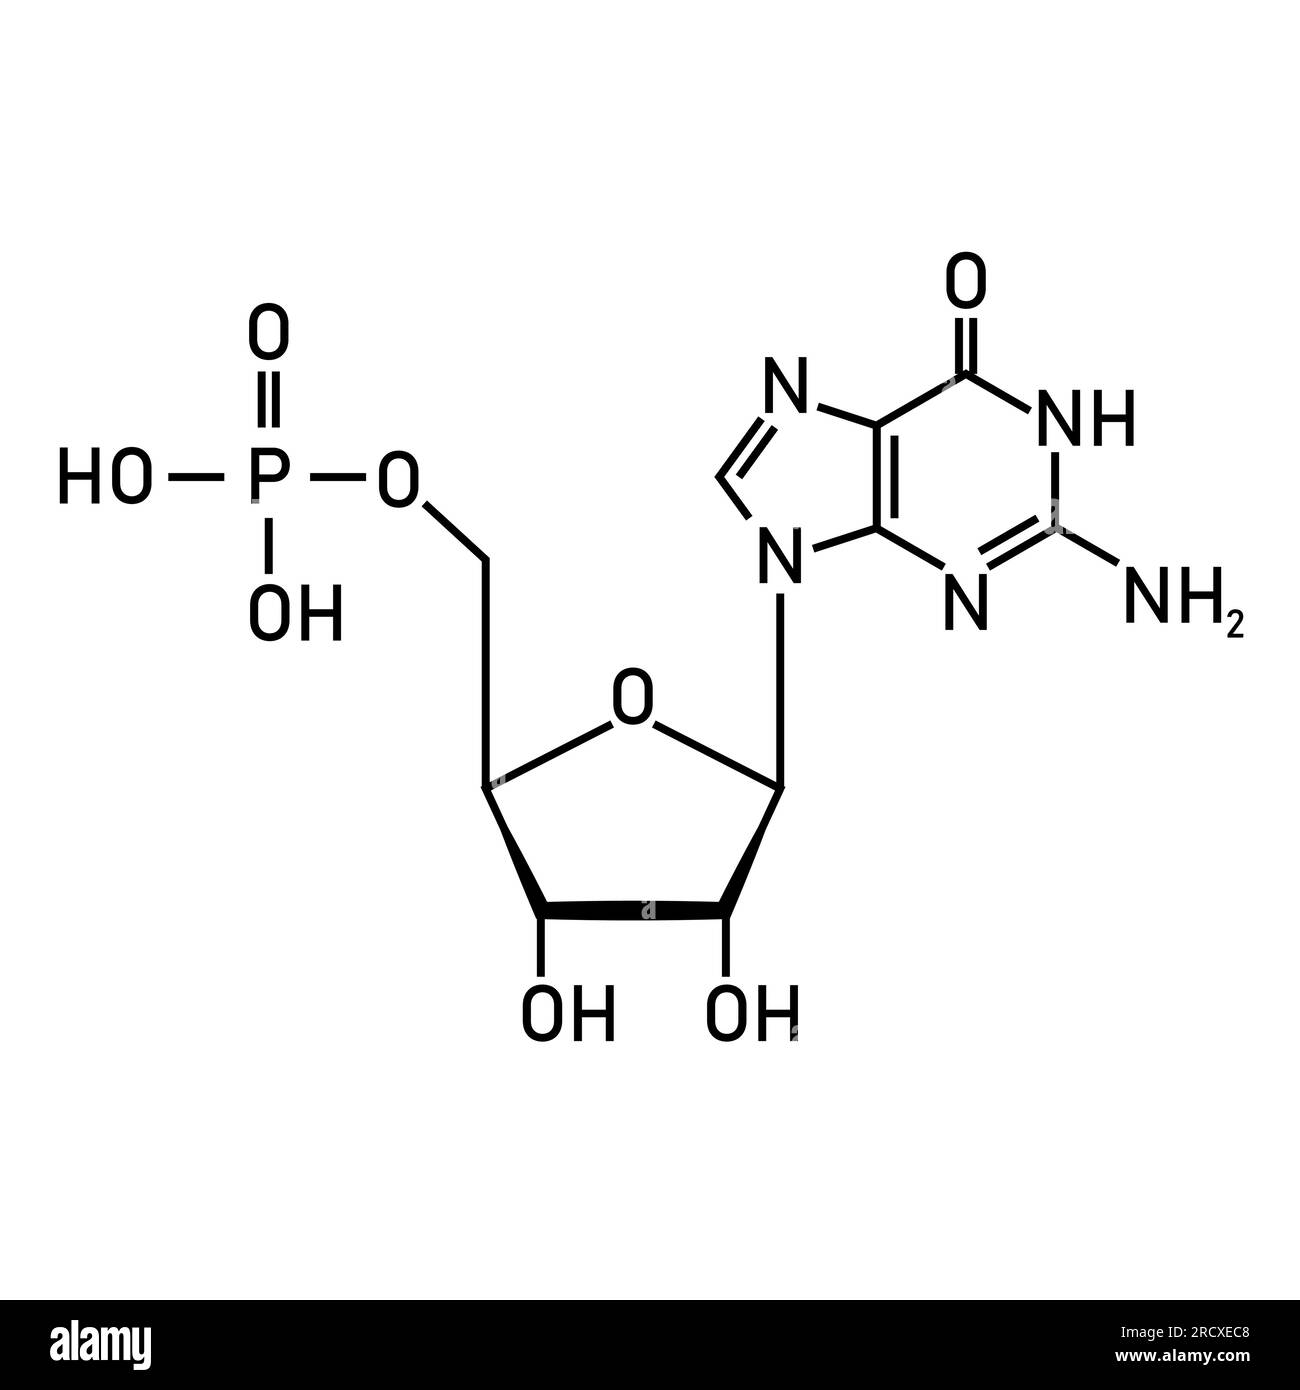 Chemical structure of DNA nucleotide. Three parts of a nucleotide. Phosphate group, pentose sugar and nitrogenous base. Nucleic acids. Vector illustra Stock Vector